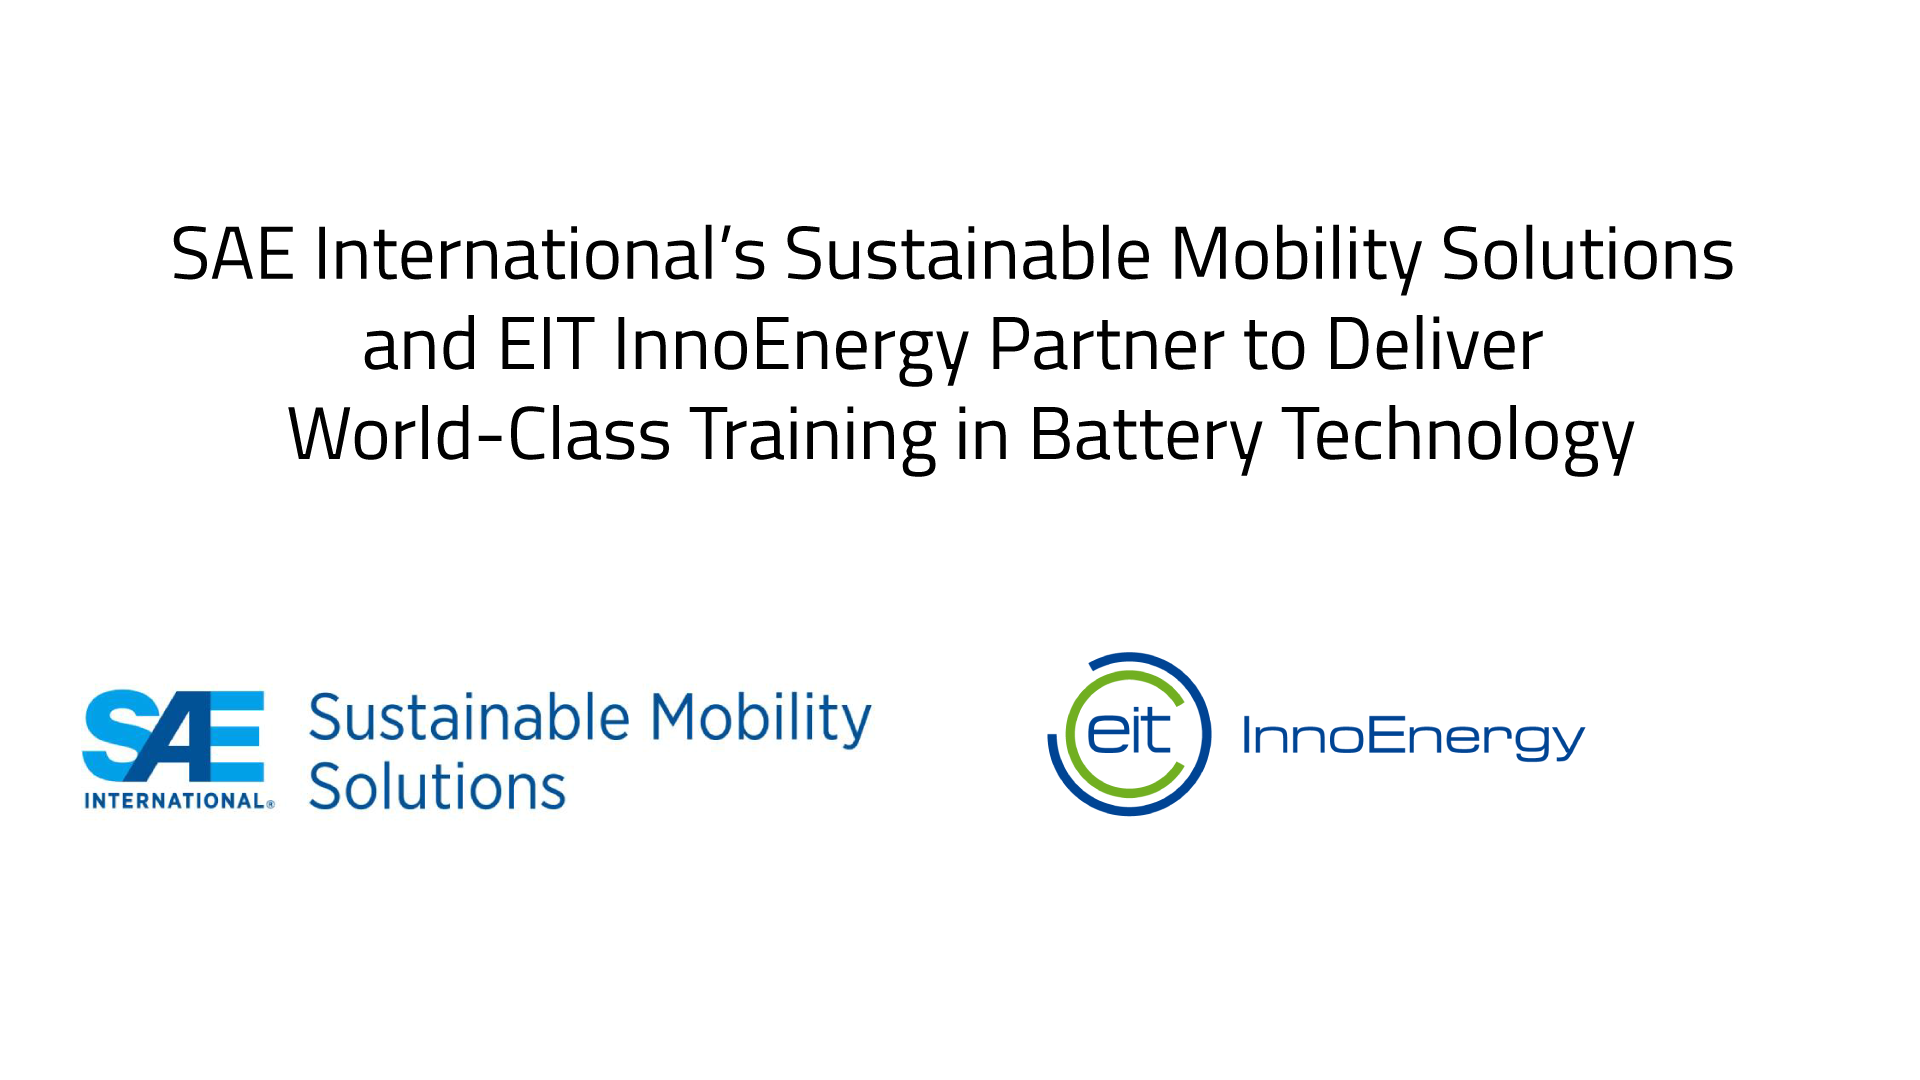 SAE International’s Sustainable Mobility Solutions and EIT InnoEnergy Partner to Deliver World-Class Training in Battery Technology